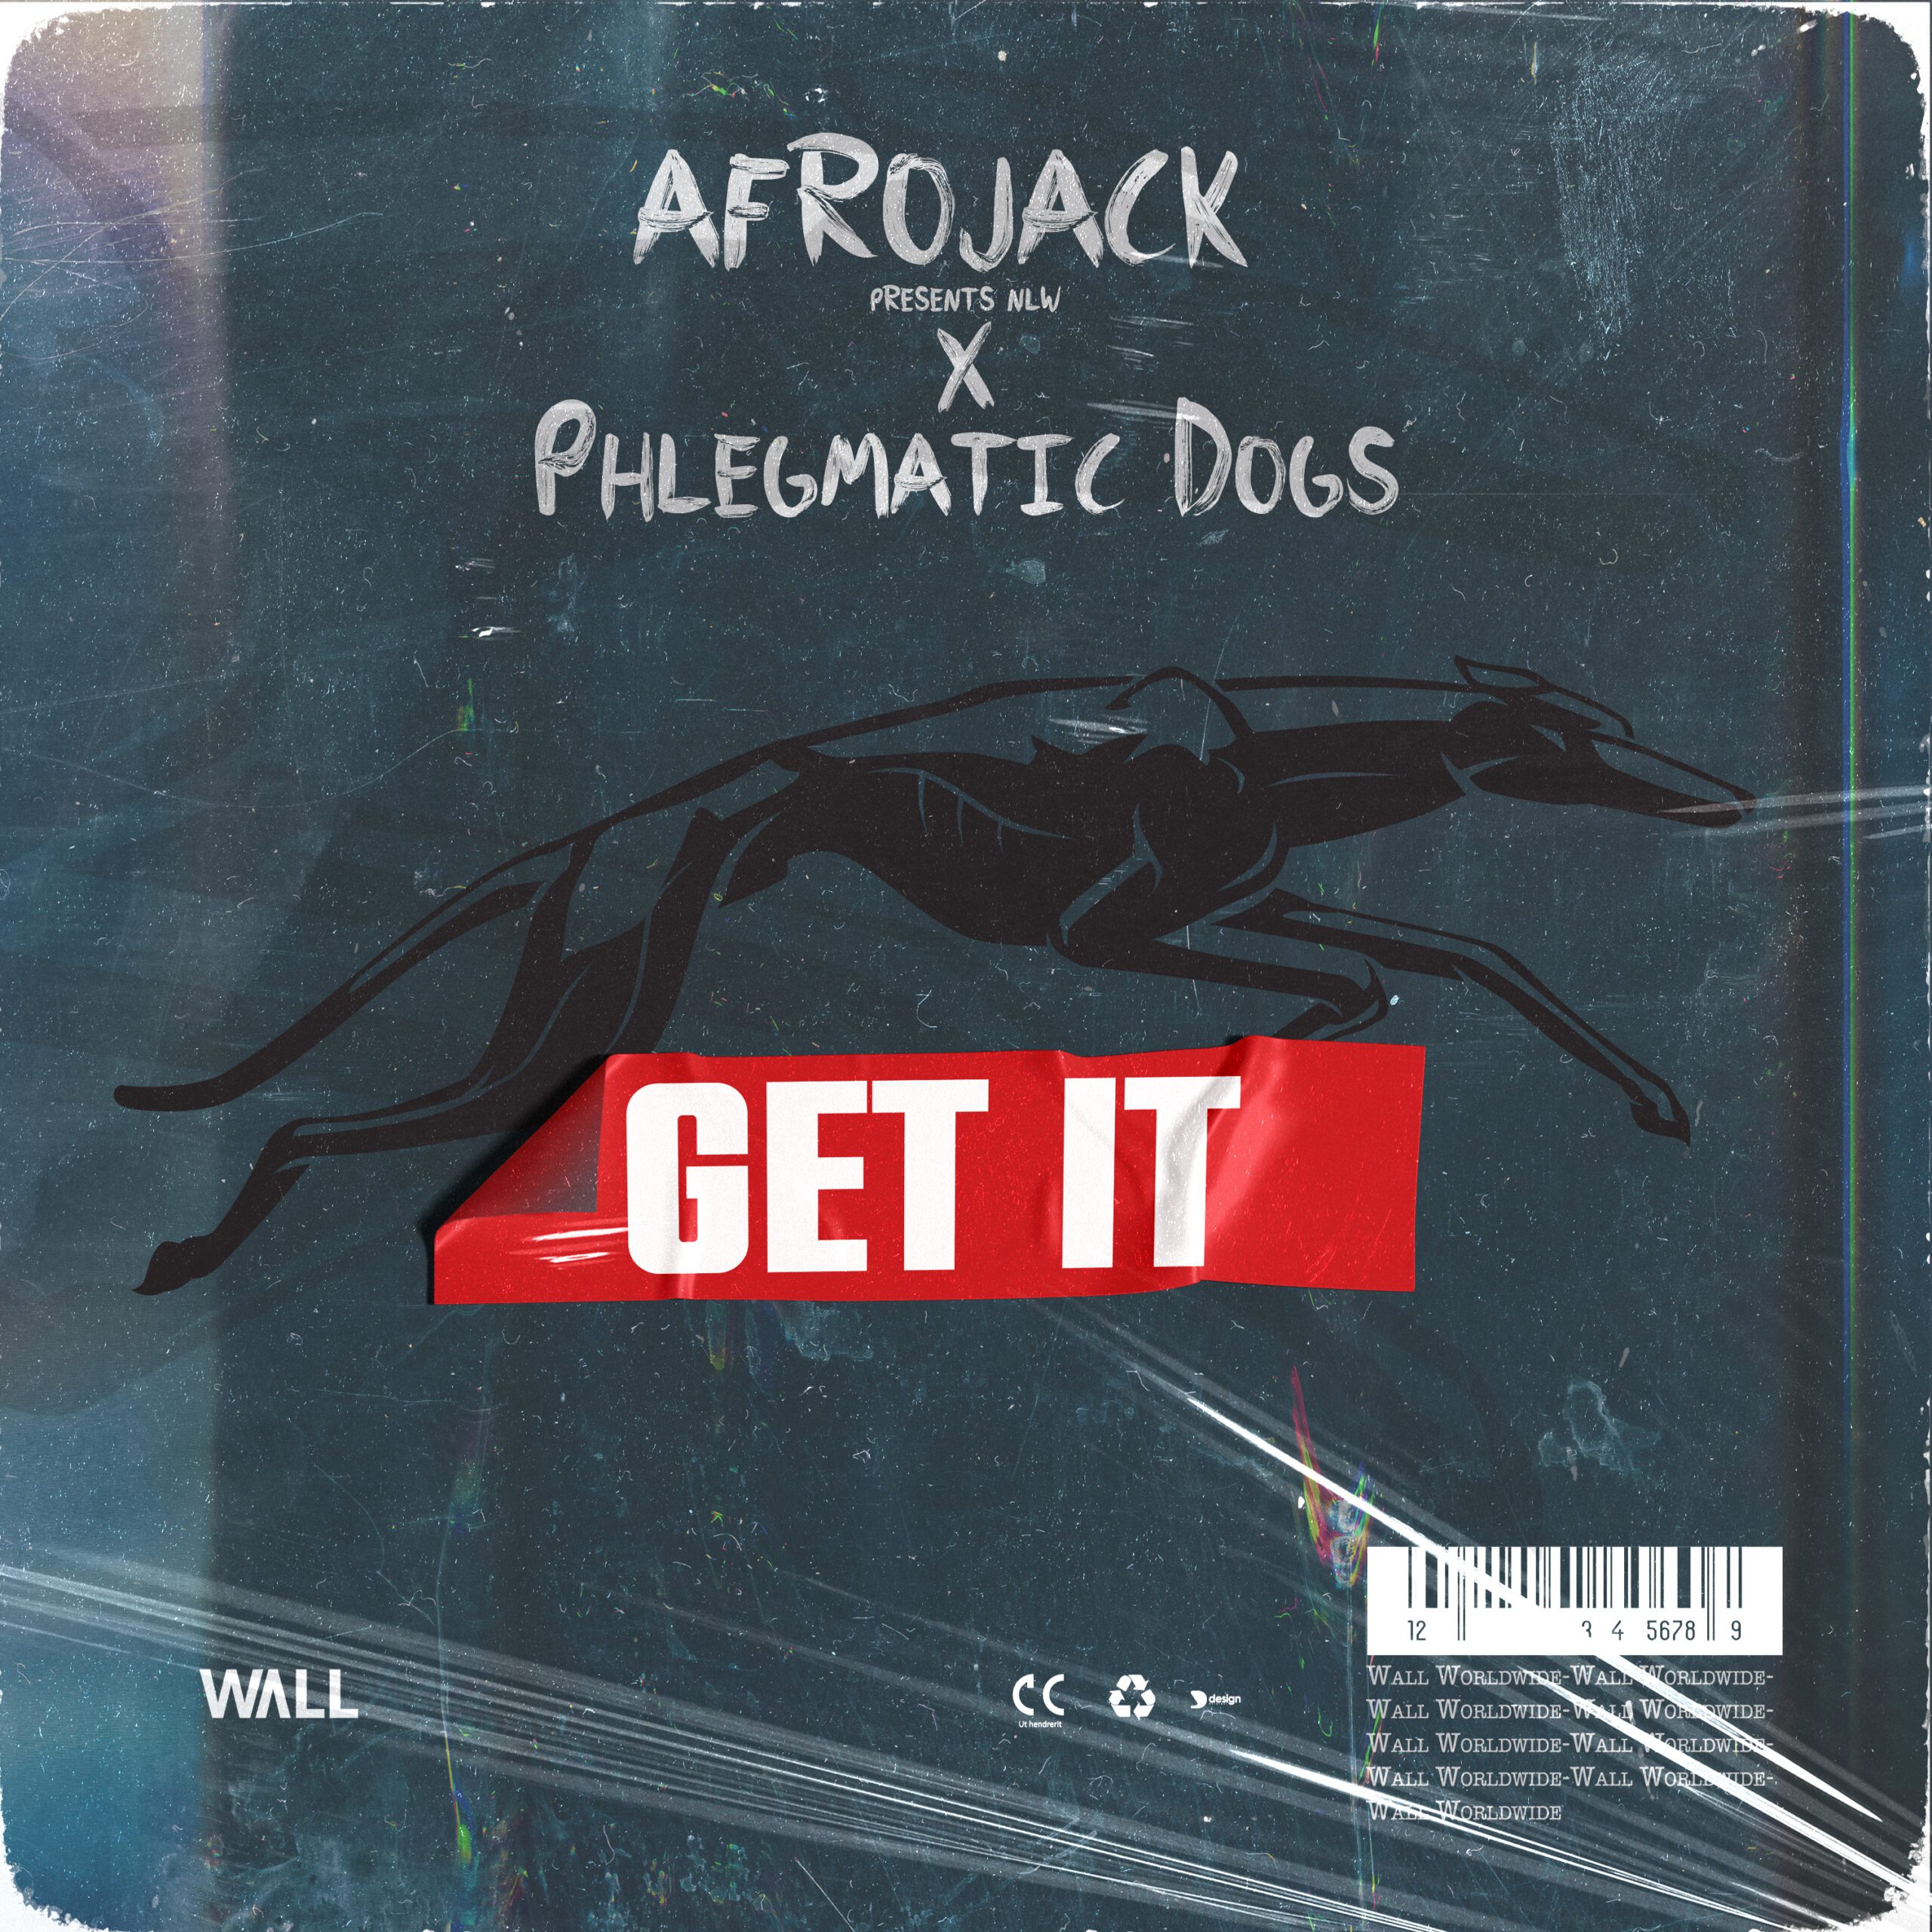 AFROJACK presents ‘NLW’ x Phlegmatic Dogs – Get It